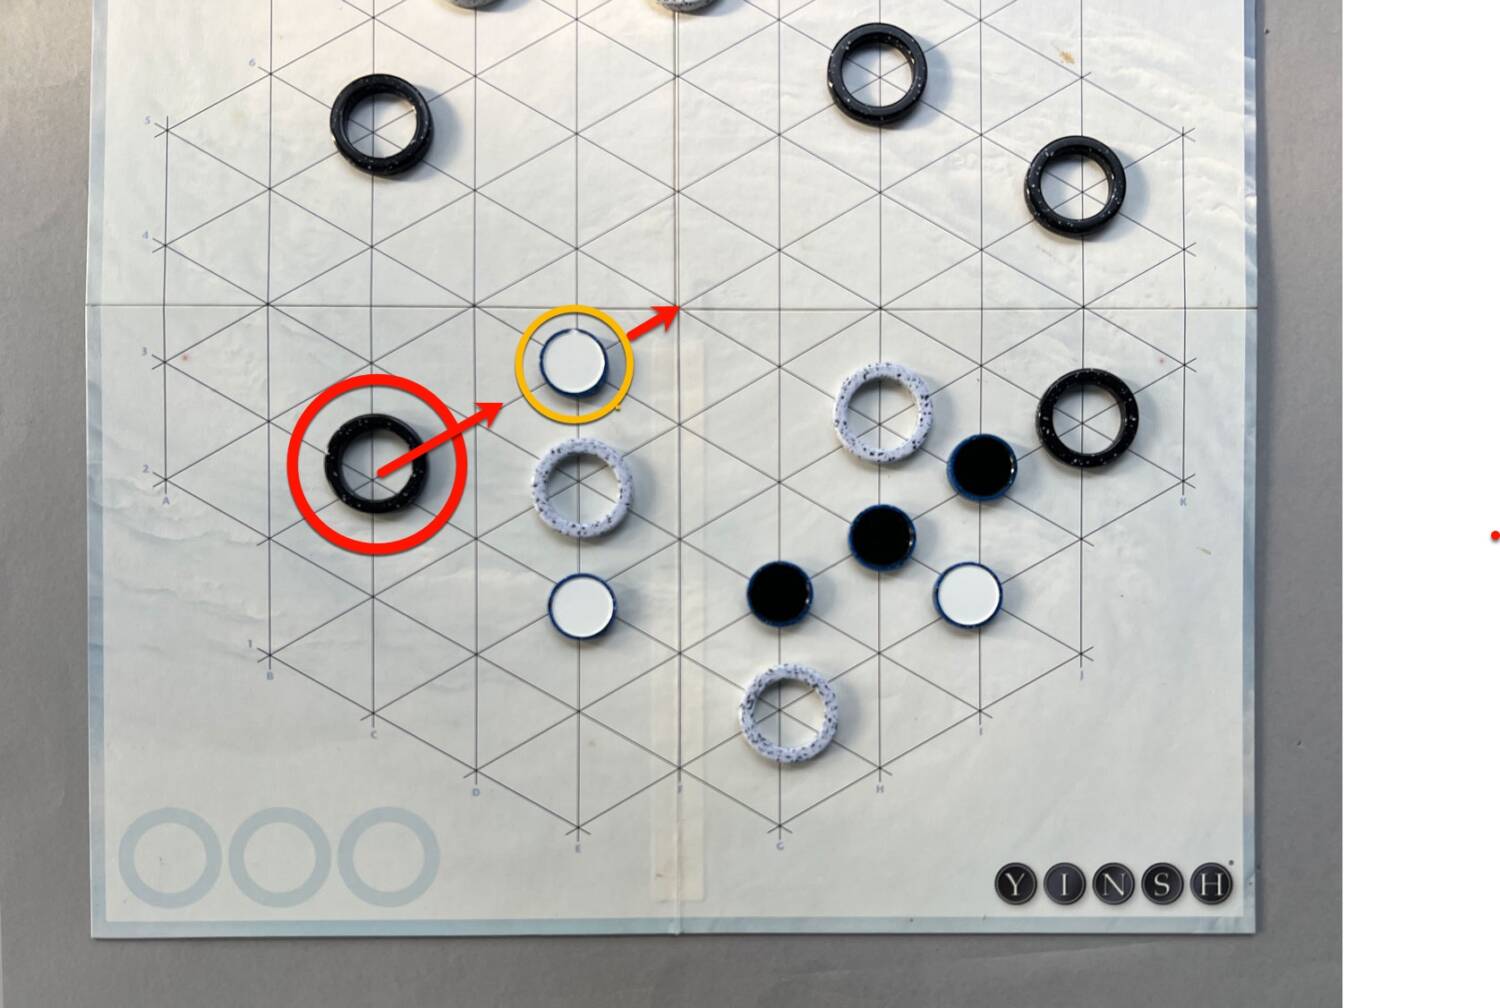 Black takes the Black ring, moving just past the white piece...